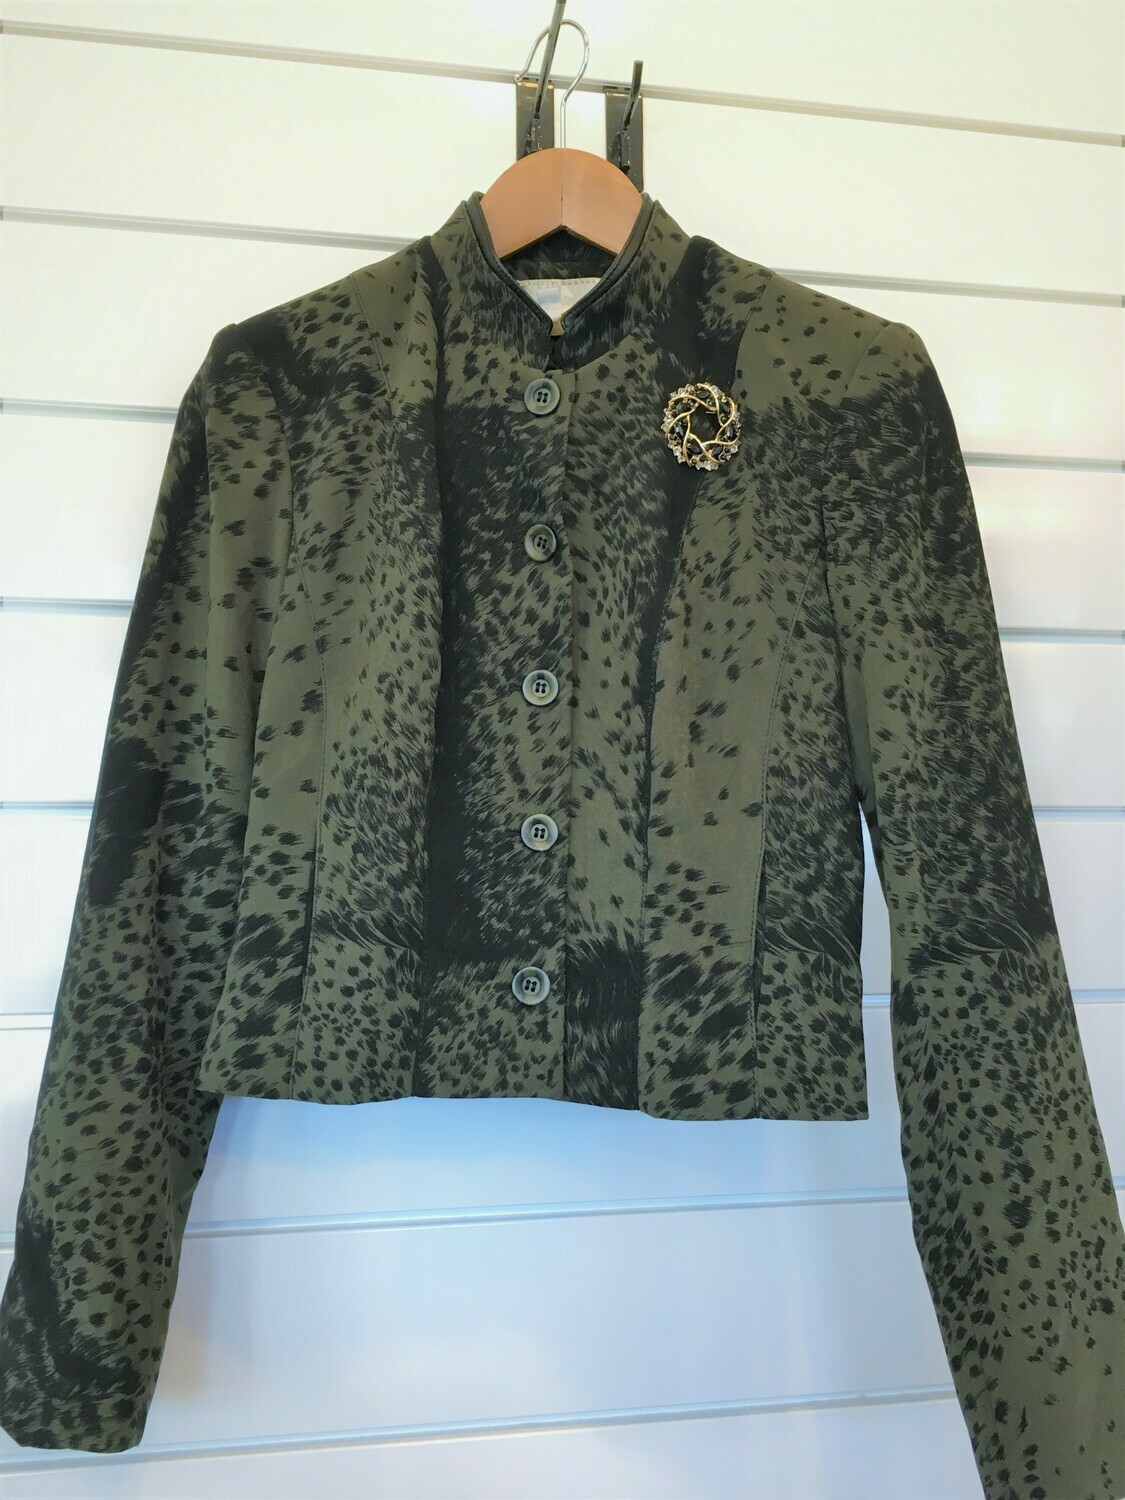 Loden Green and Black Blazer - Size 2